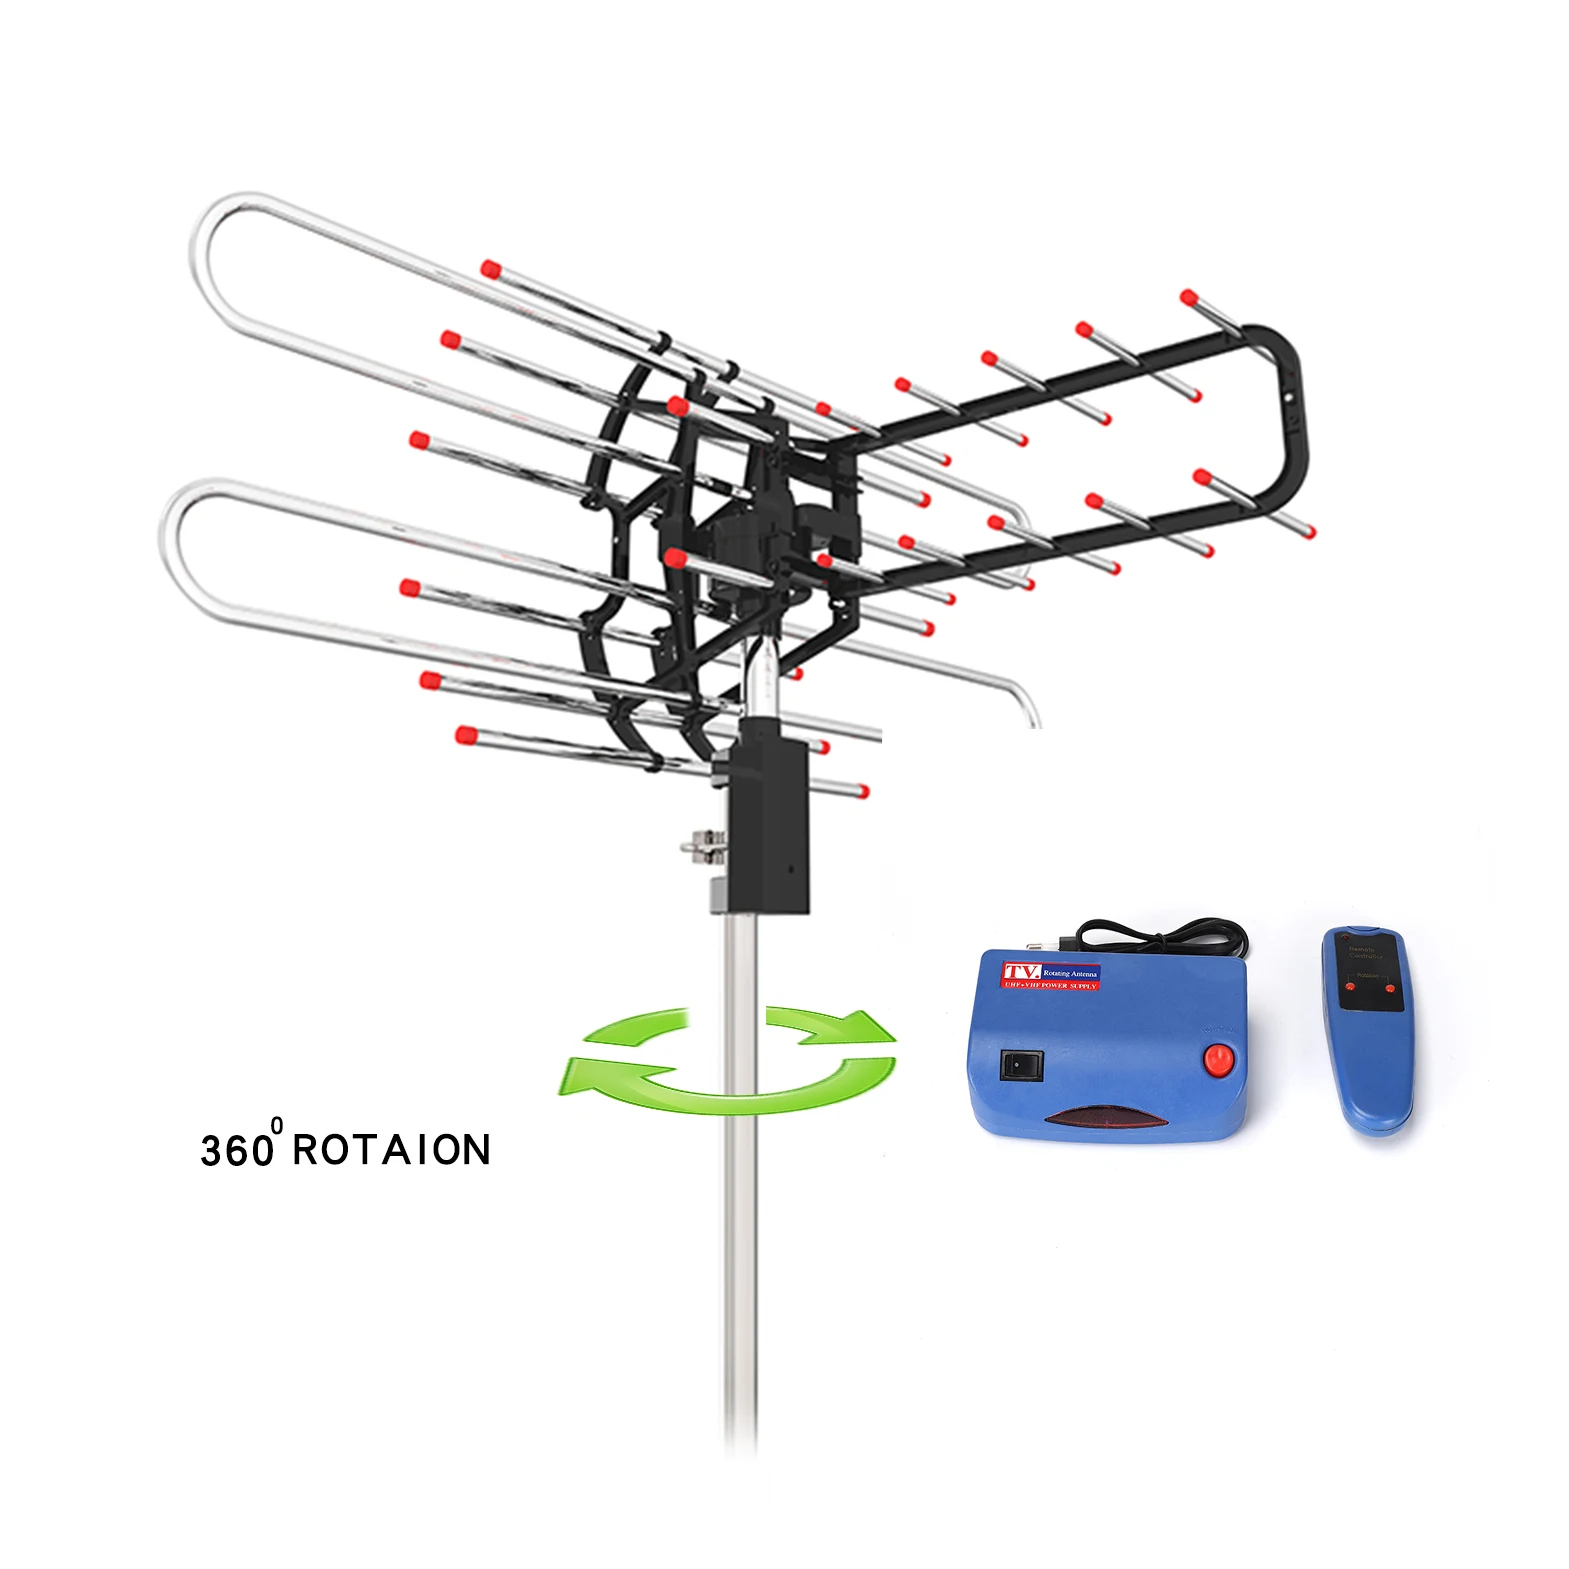 New Selling Long Range 360 Degree Tv Antena Digital Outdoor Hdtv Aerial Get 13 To 57 Tv Antenna For 4K Free Local Channels